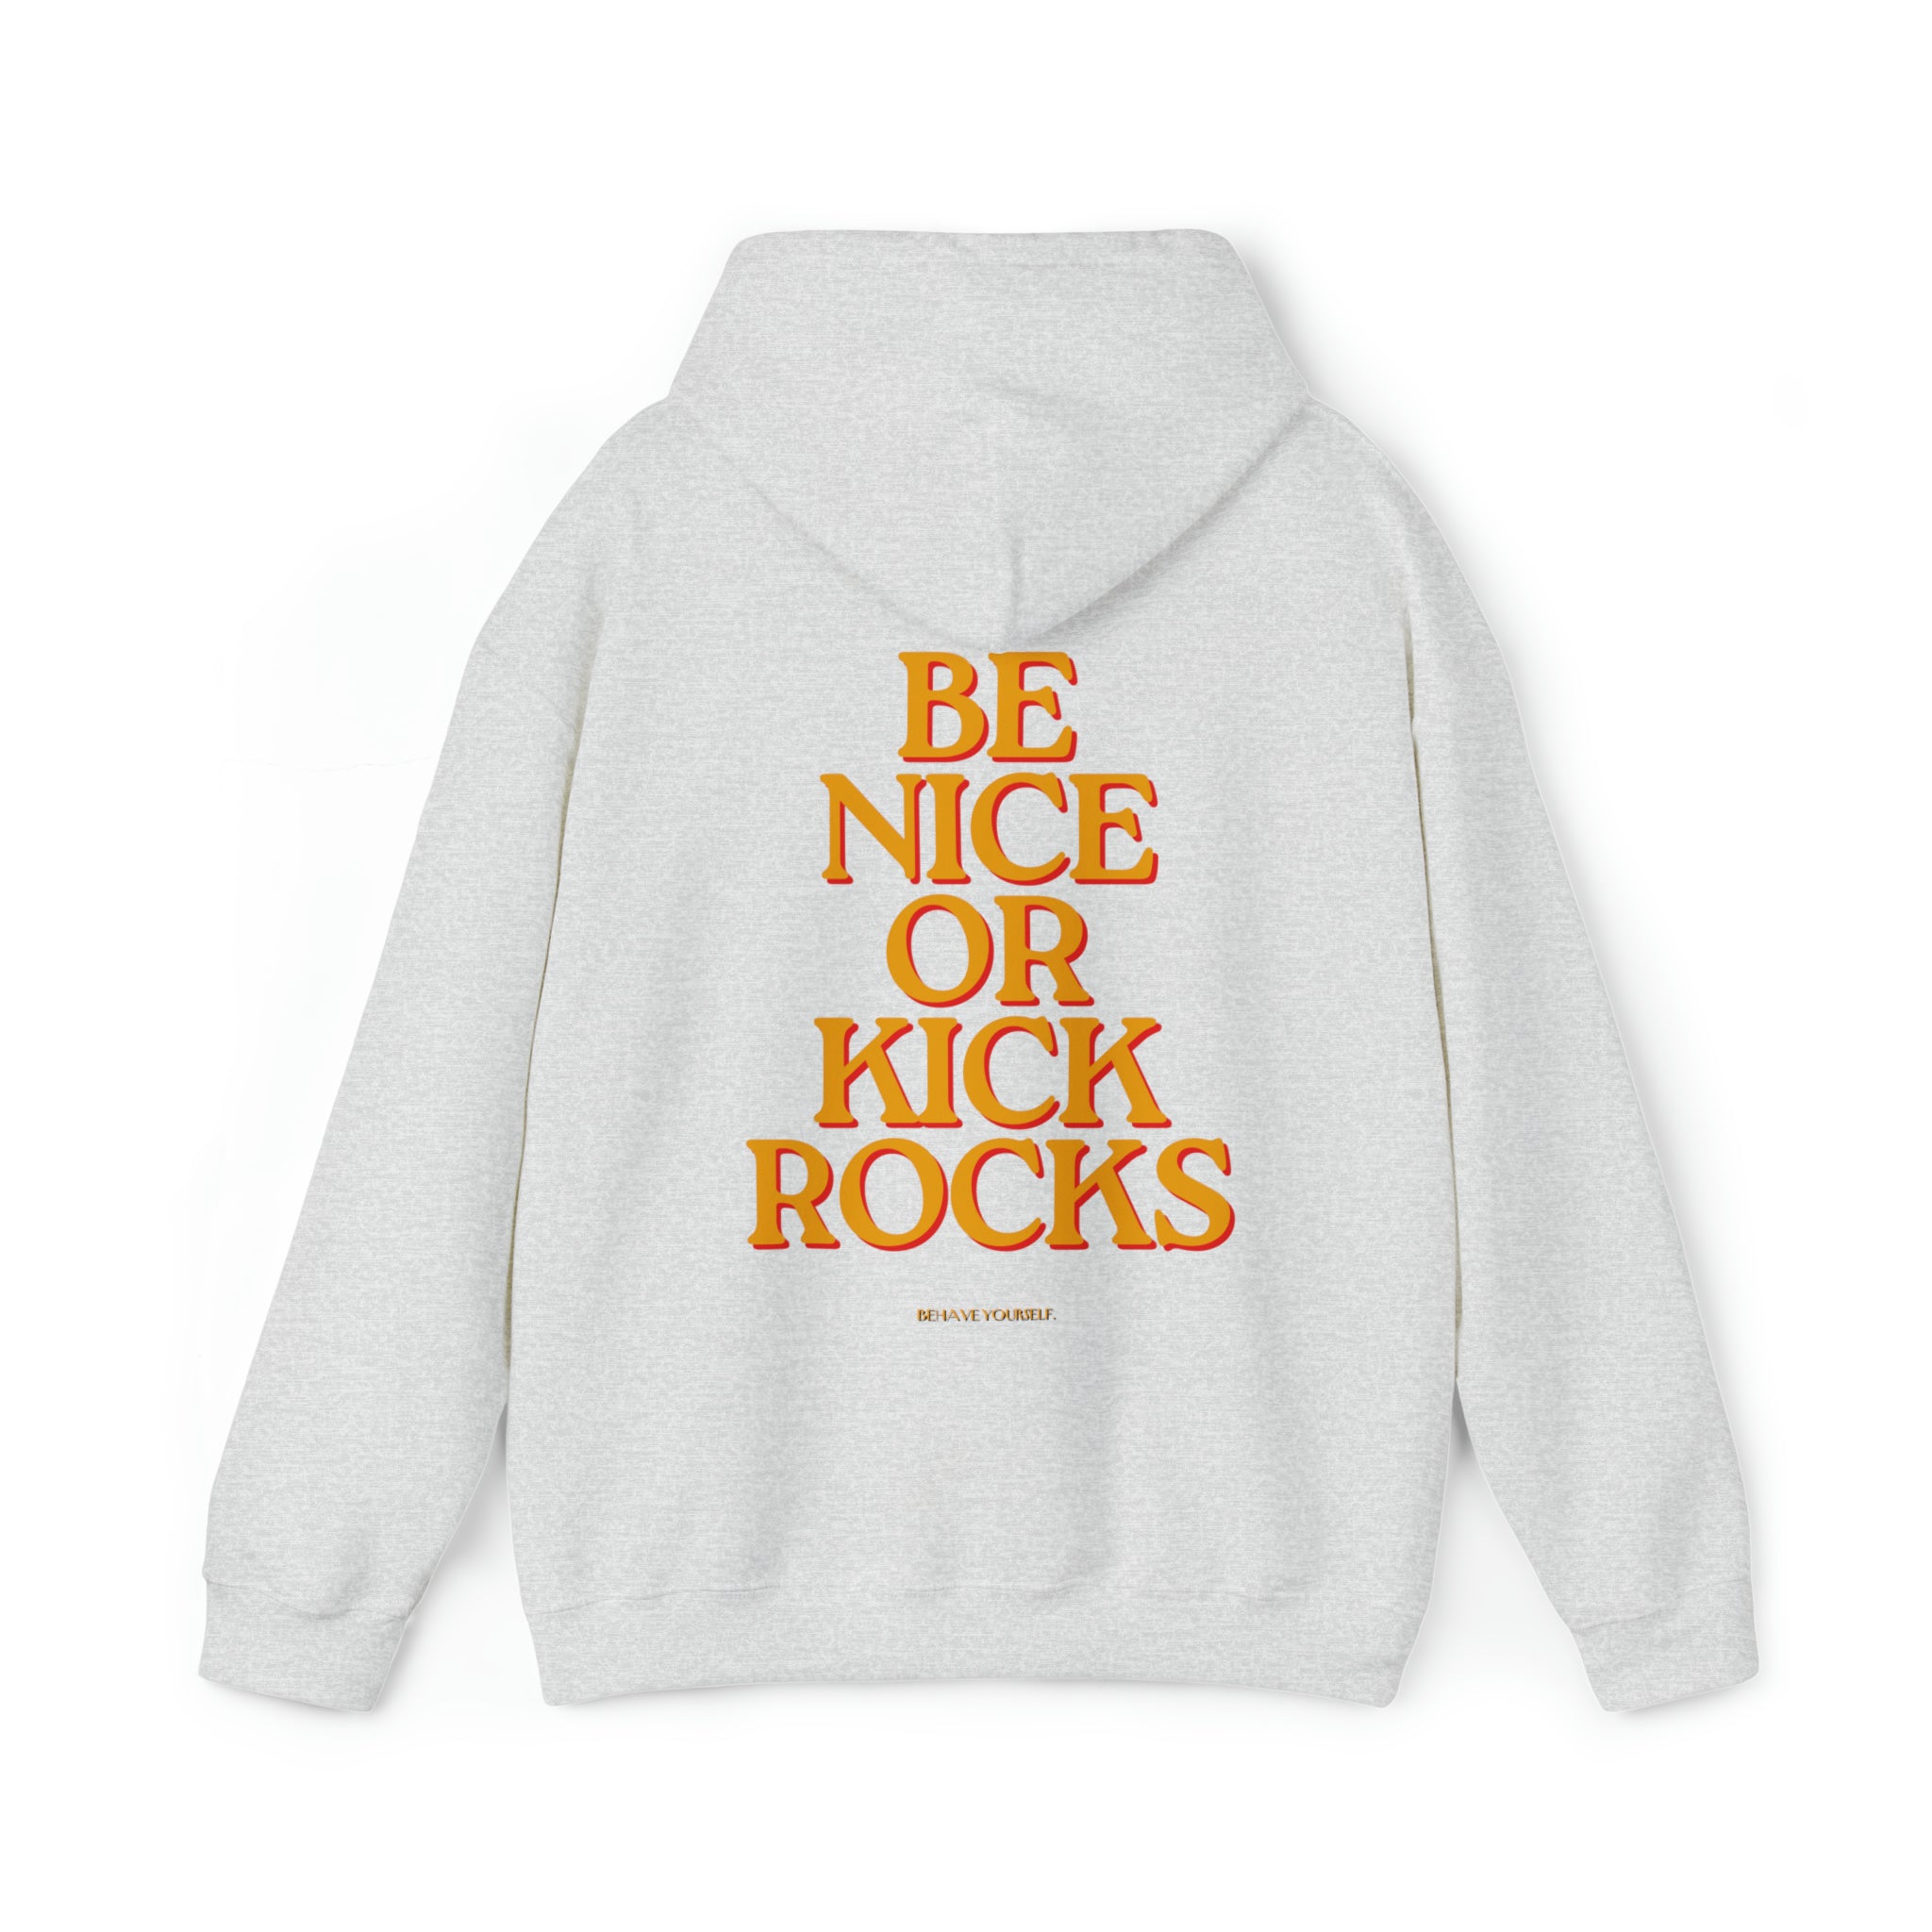 Front View of Be Nice or Kick Rocks Hoodie in white